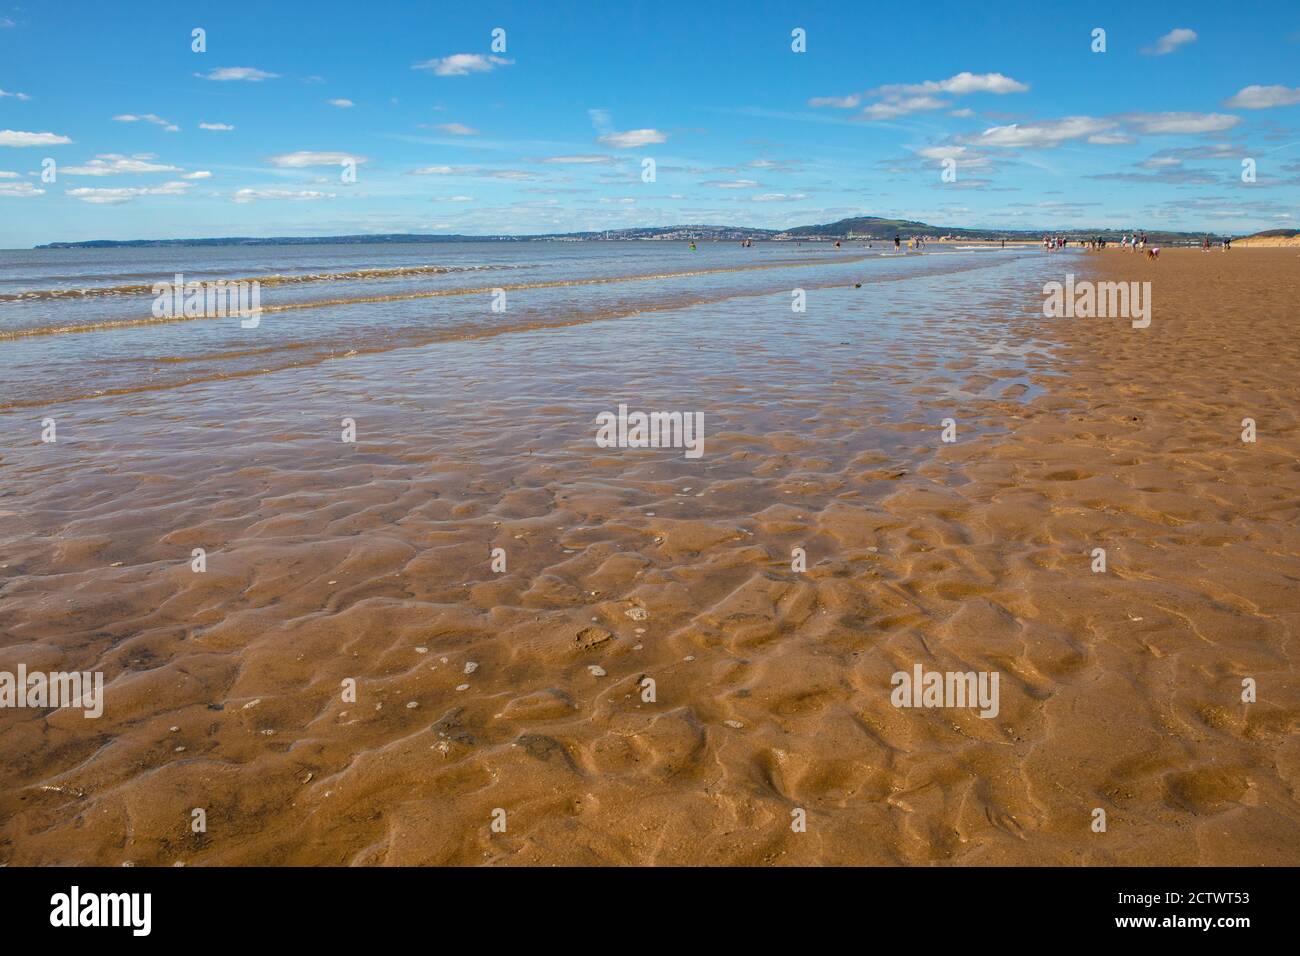 A view of the beautiful Aberavon Beach, also known as Aberavon Sands in South Wales, UK - looking towards Swansea Bay.  It is one of the longest beach Stock Photo